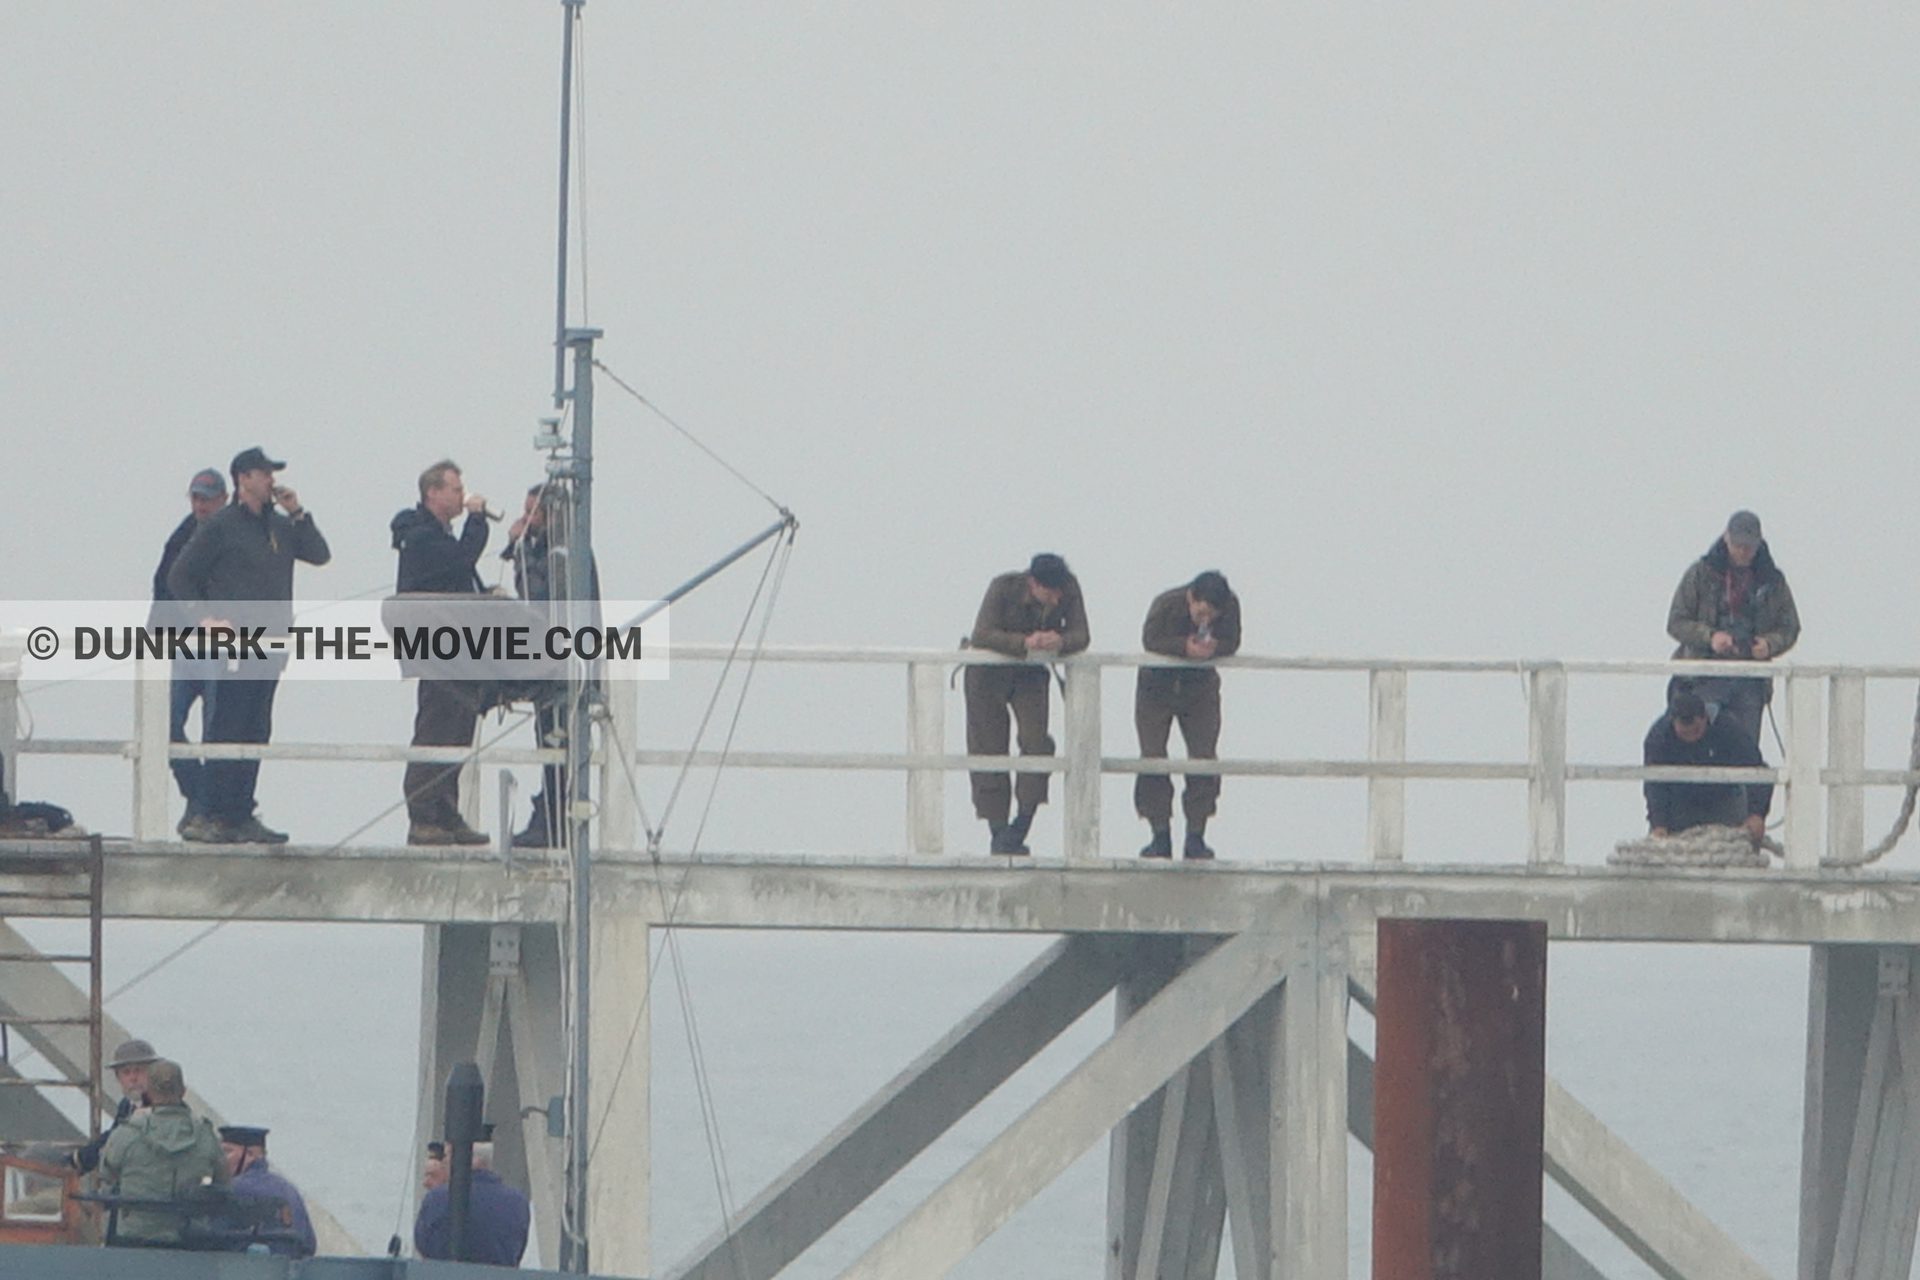 Picture with actor, grey sky, supernumeraries, HMS Medusa - ML1387, Hoyte van Hoytema, EST pier, Christopher Nolan,  from behind the scene of the Dunkirk movie by Nolan